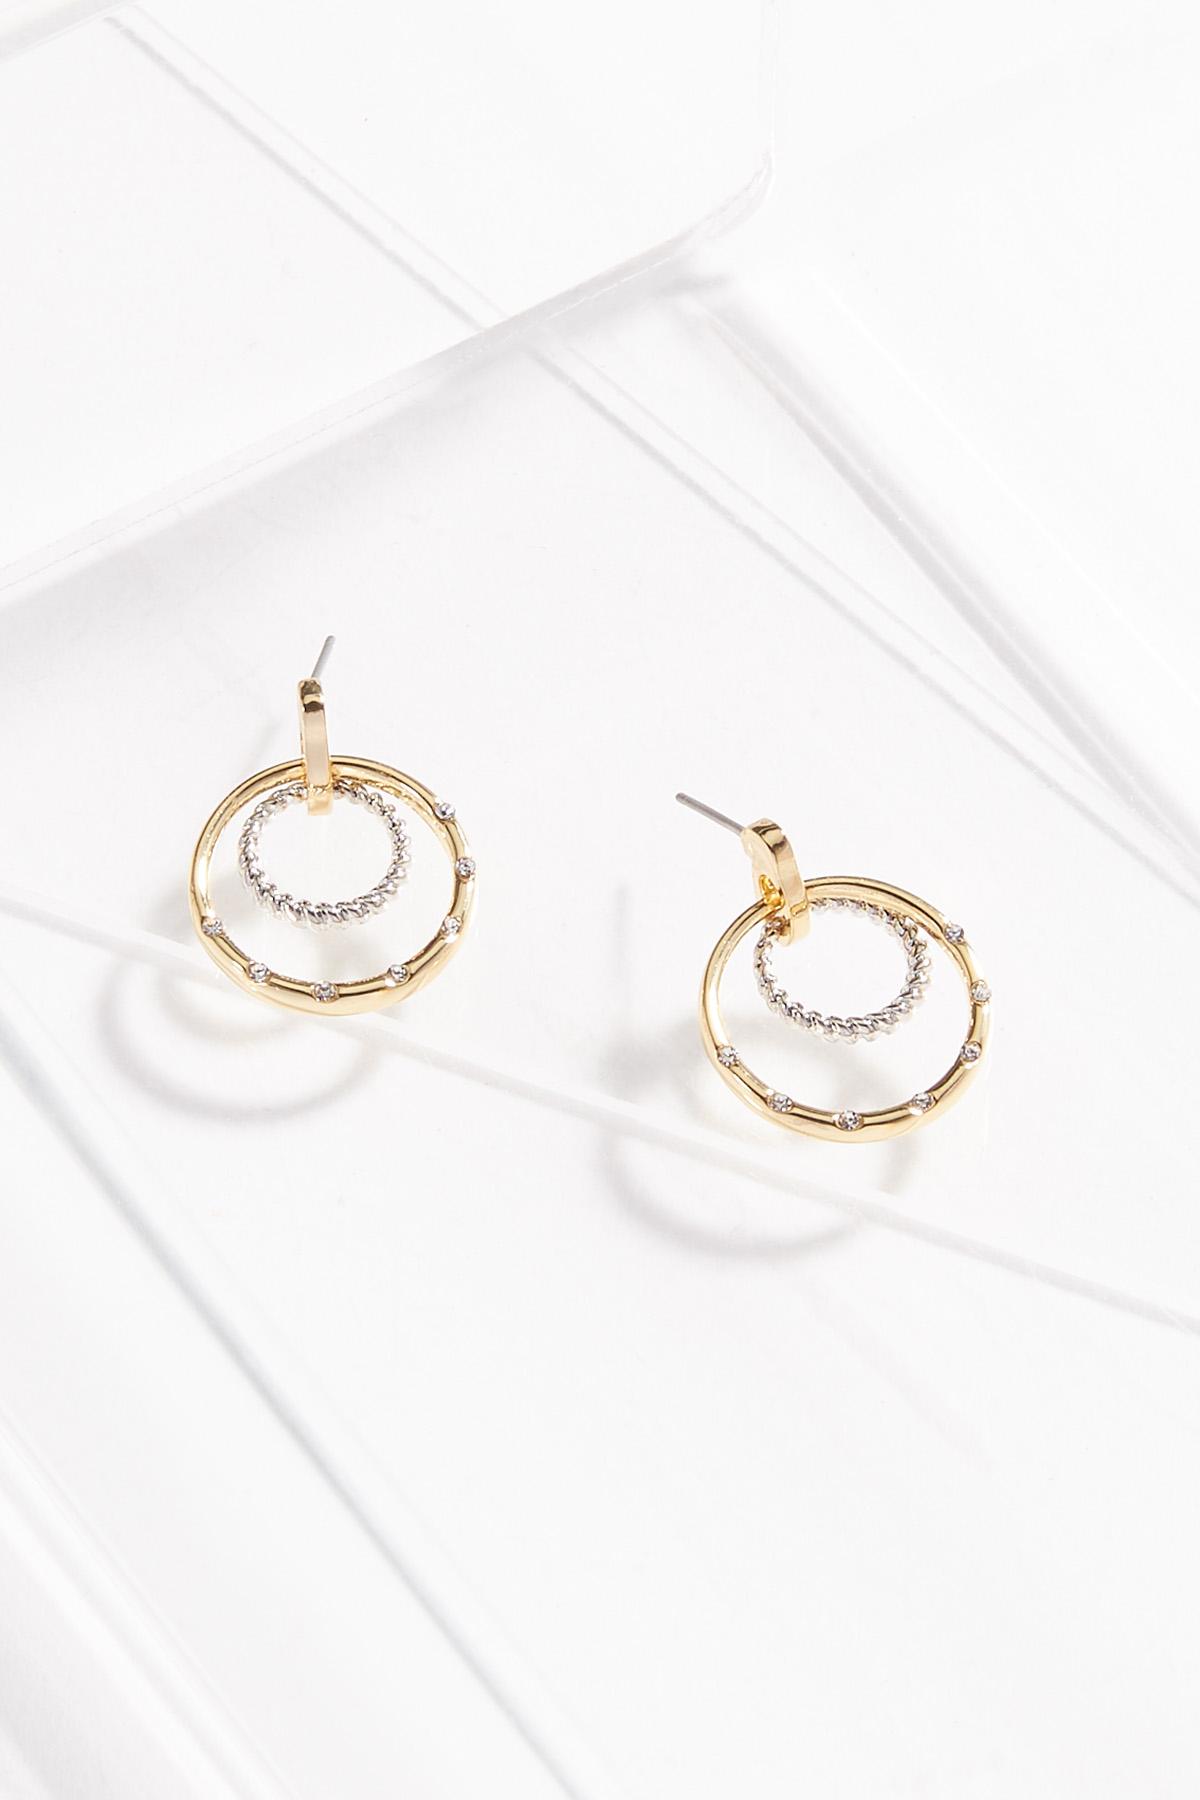 18k Gold Plated Circle Earrings